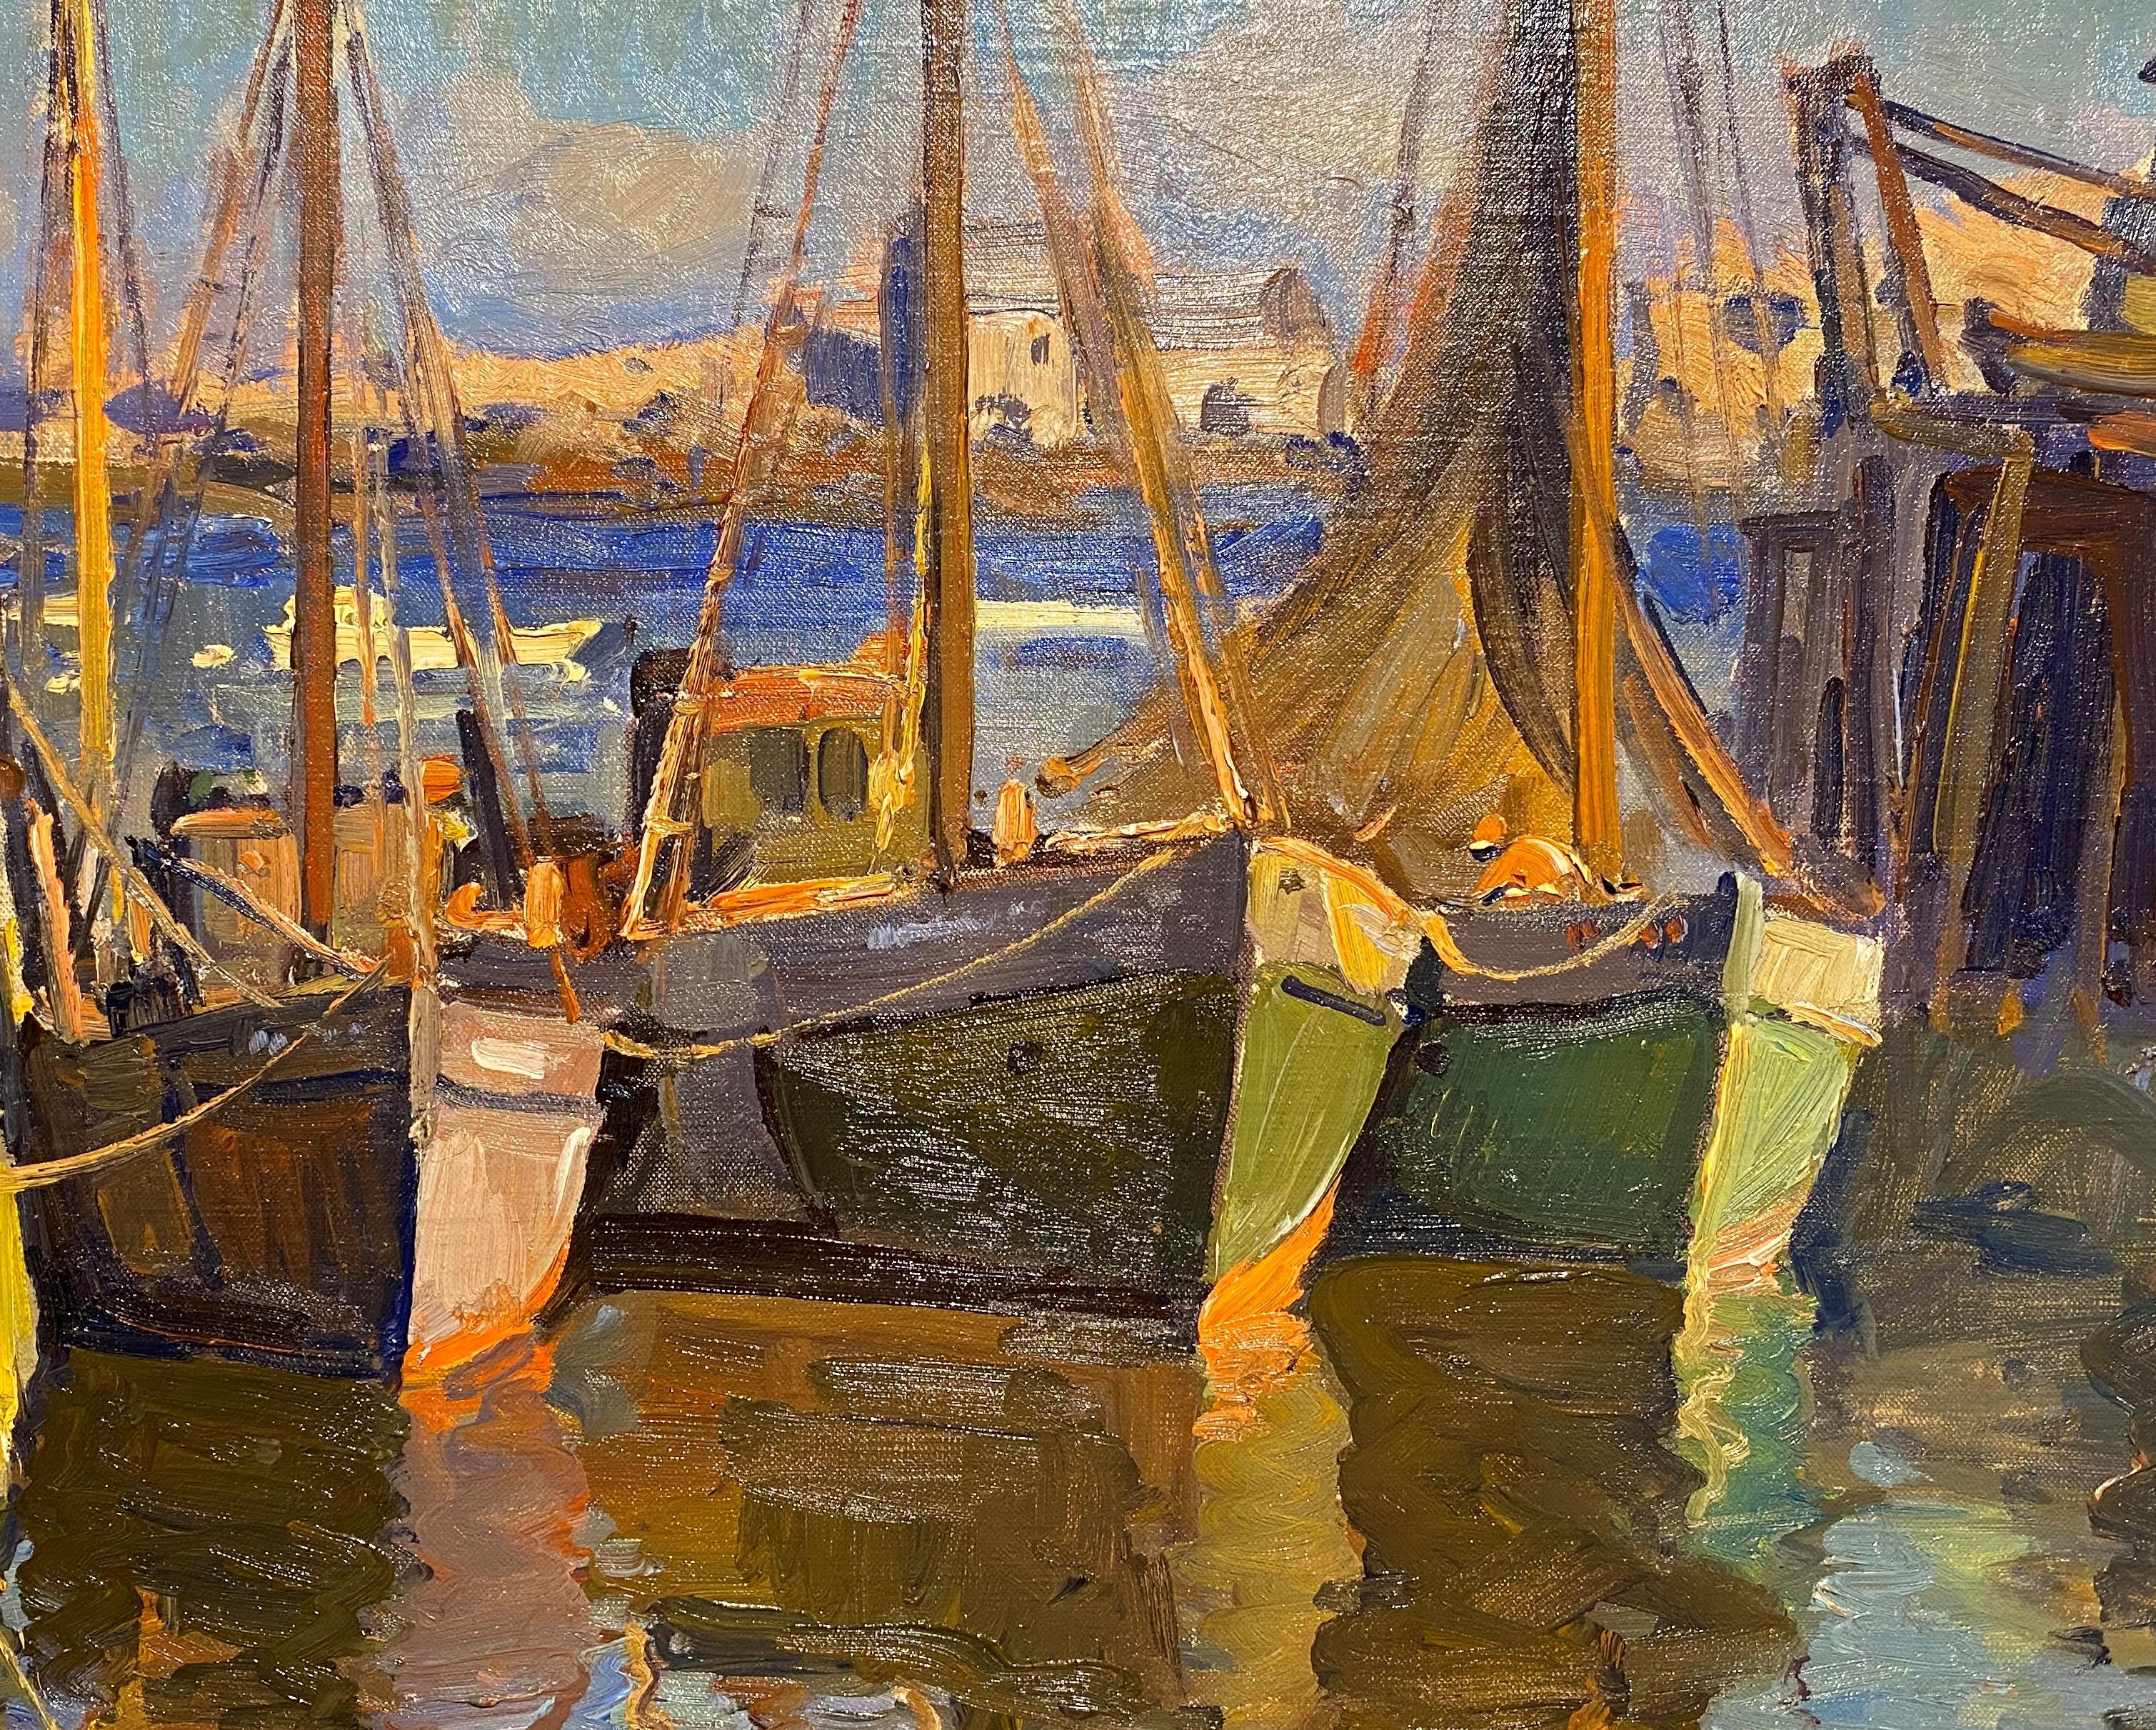 Sunset, Rockport Harbor - American Impressionist Painting by Emile Albert Gruppe